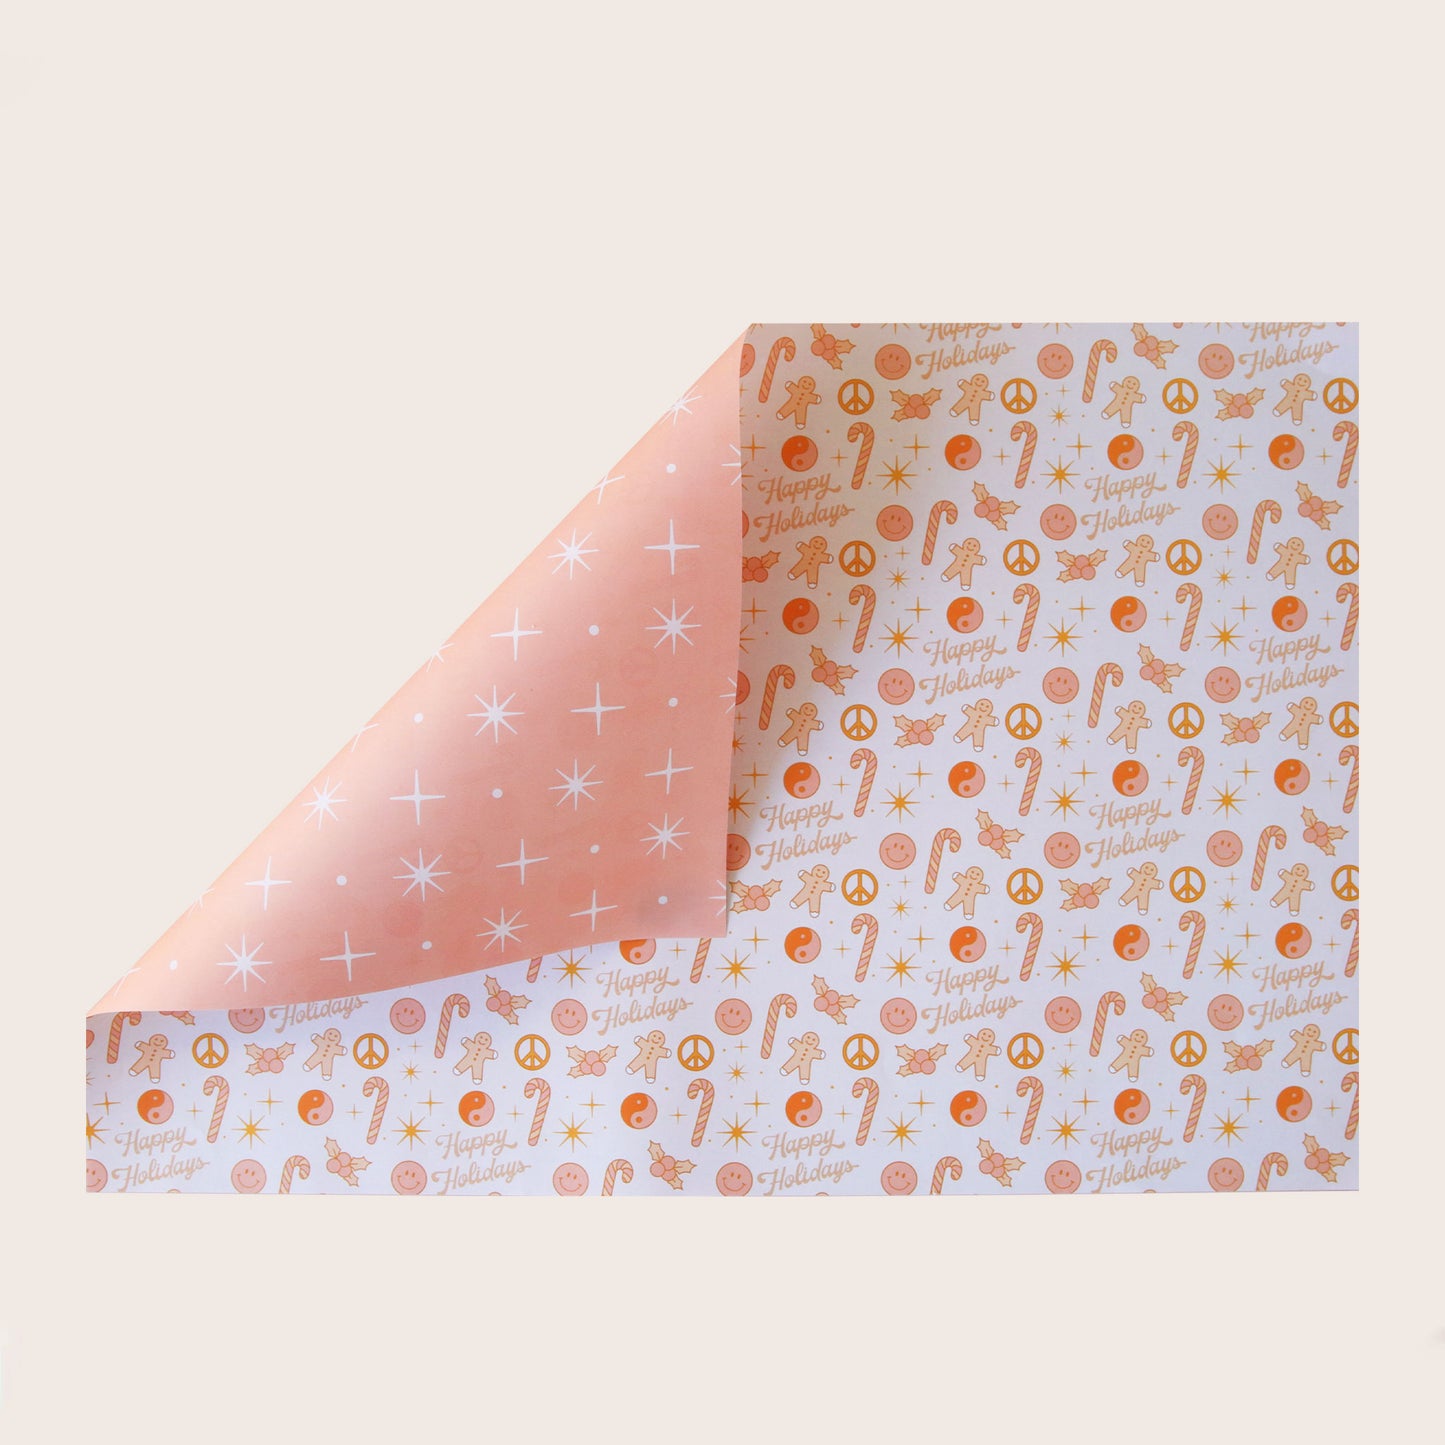 A single sheet of gift wrap with a festive print including gingerbread men, peace signs, candy canes, holly, smiley faces, and dainty "Happy Holidays". The gift wrap is reversible and the side with the print is on a white background while the symbols are shades of pink and orange and the reversible side features a salmon color background and various white stars and twinkle symbols.